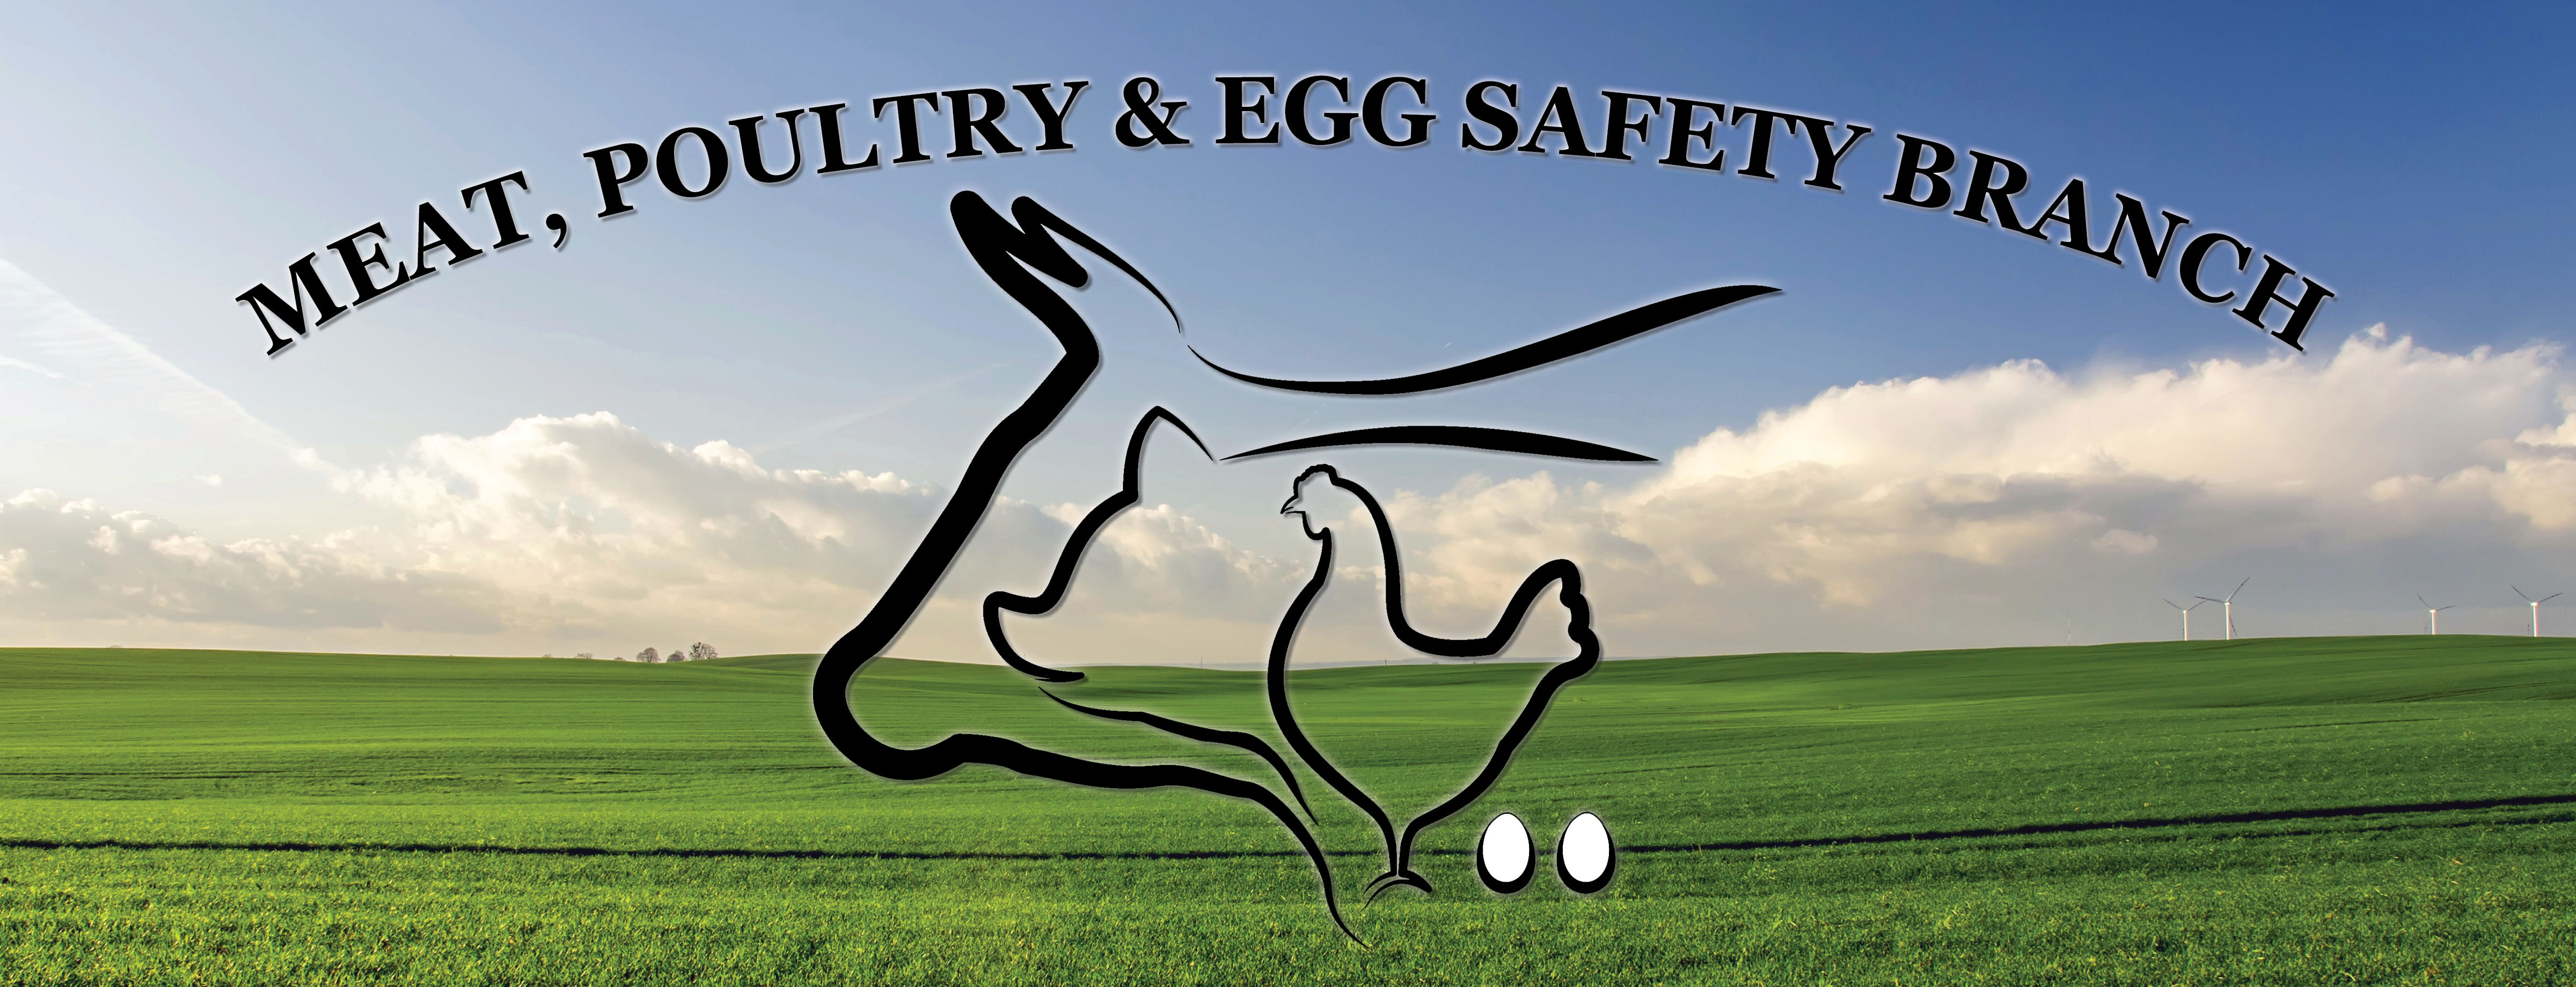 Meat, Poultry & Egg Safety Branch and their logo